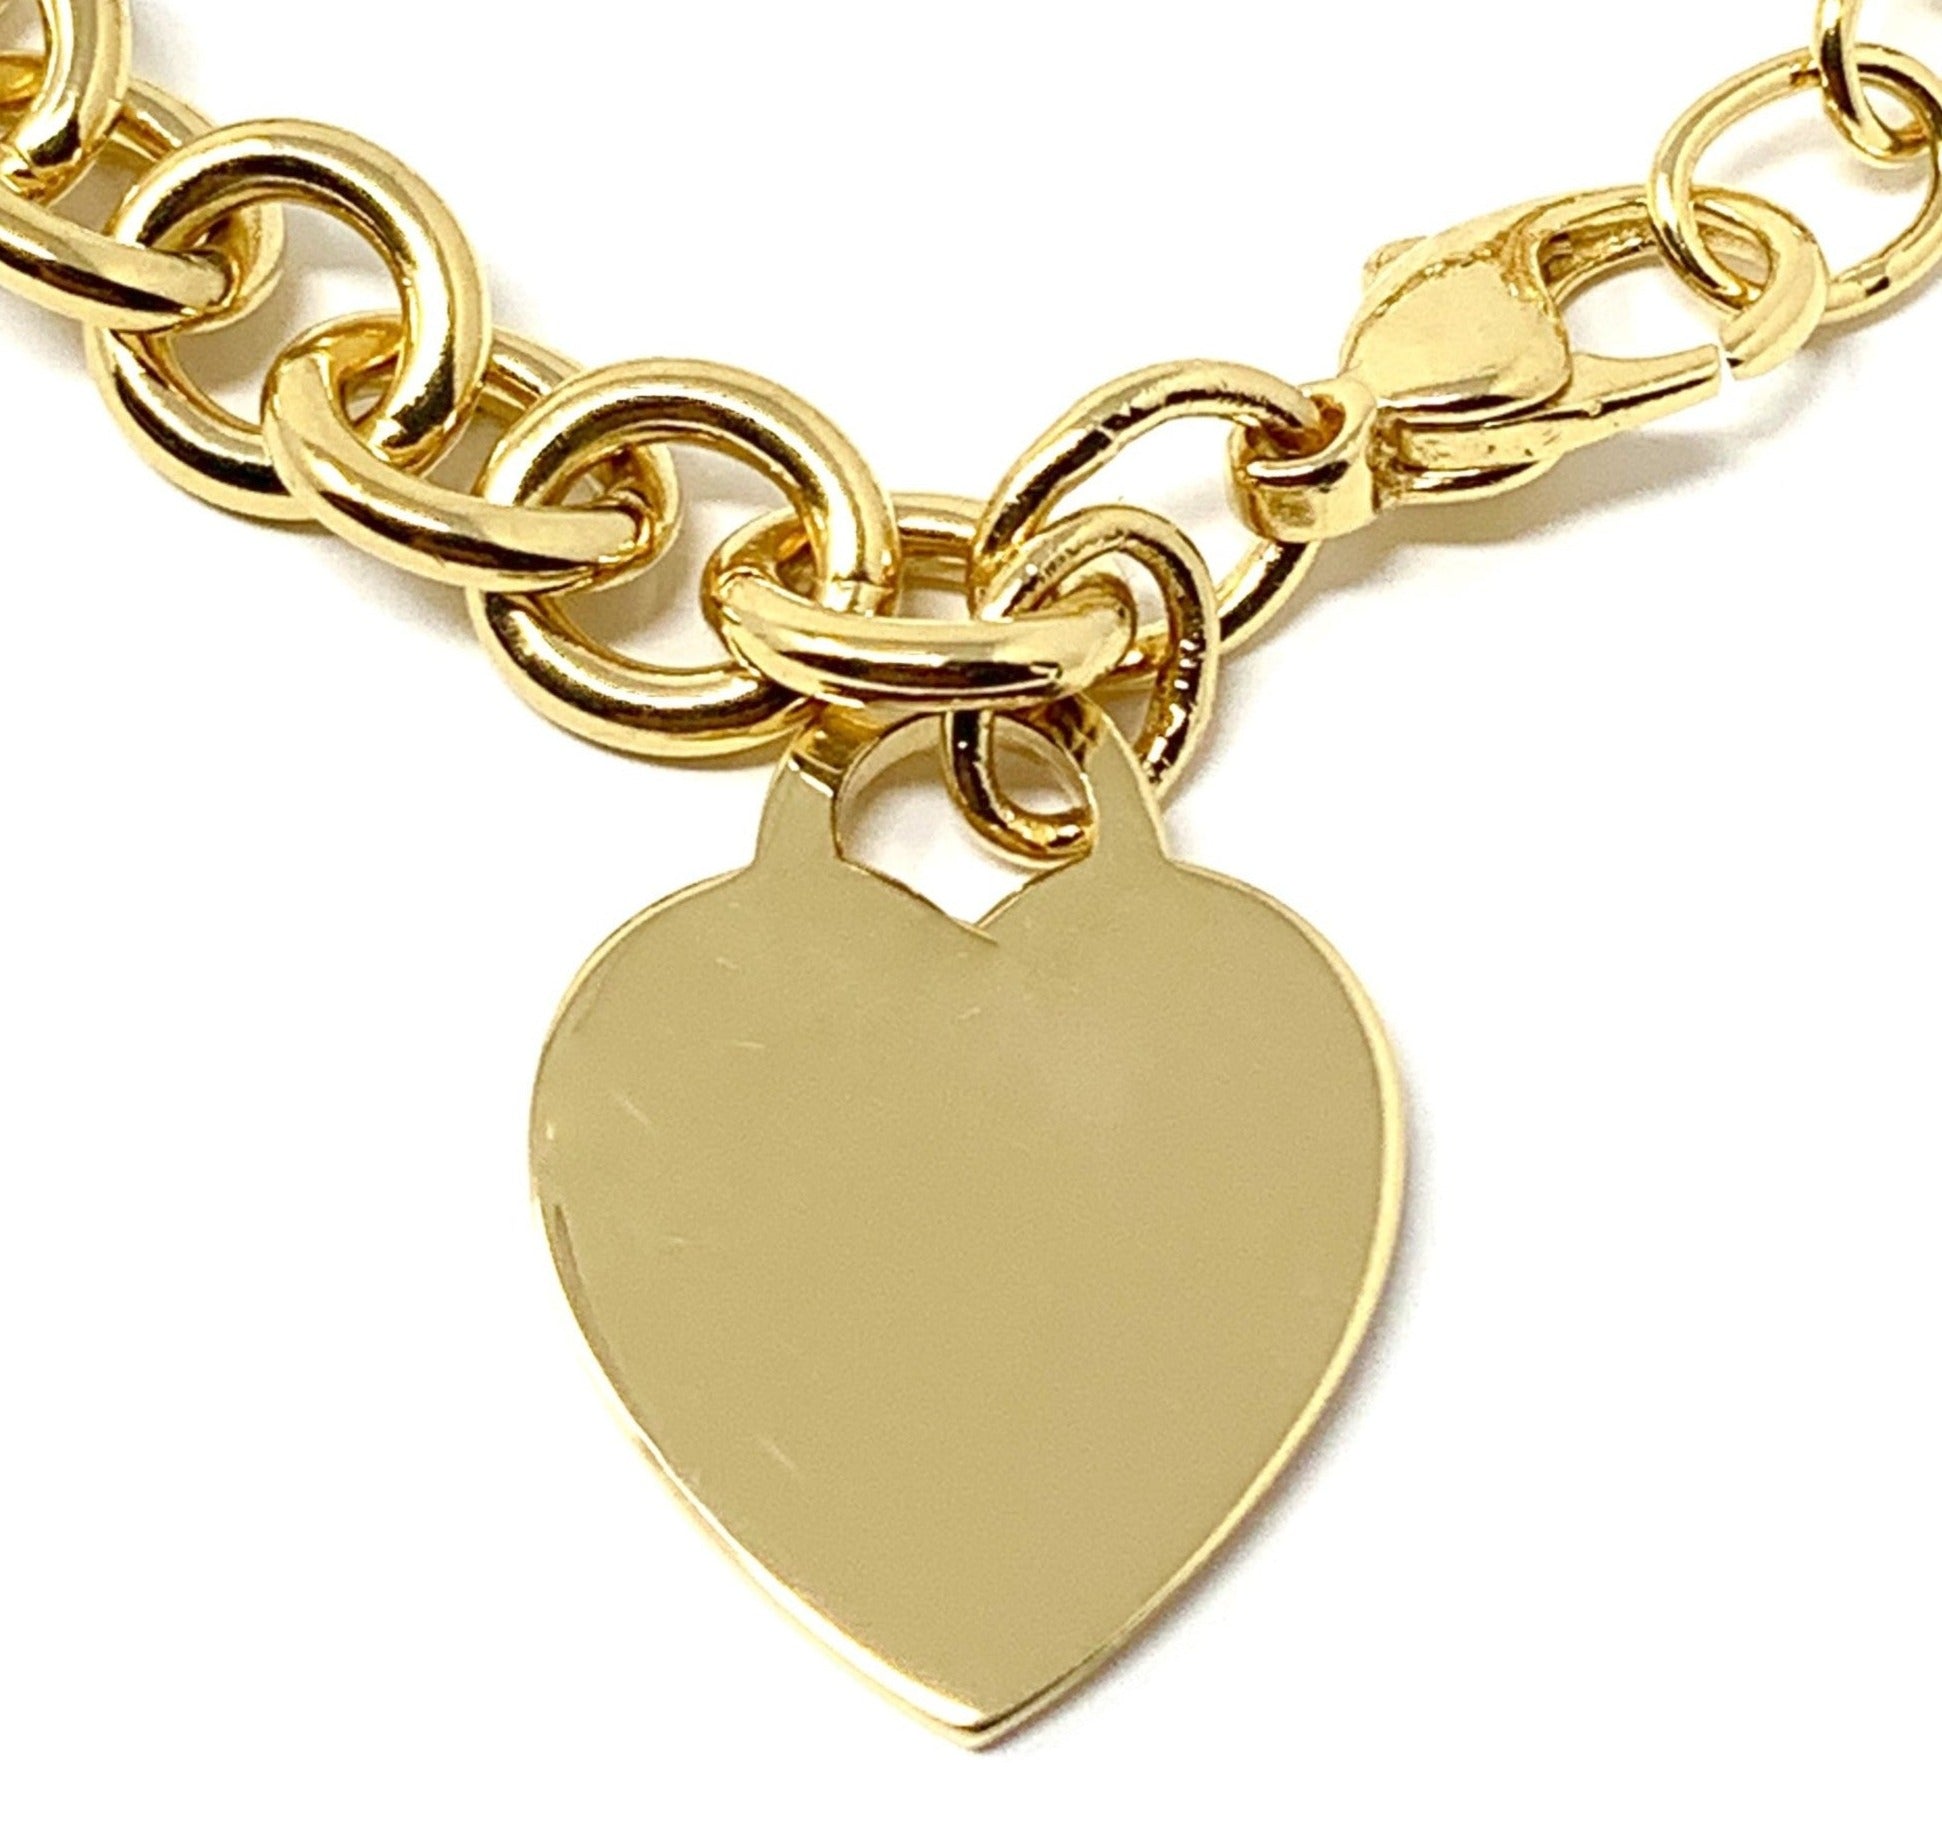 Tiffany & Co Bracelet With Heart Lock and Disc Charm in Yellow Gold